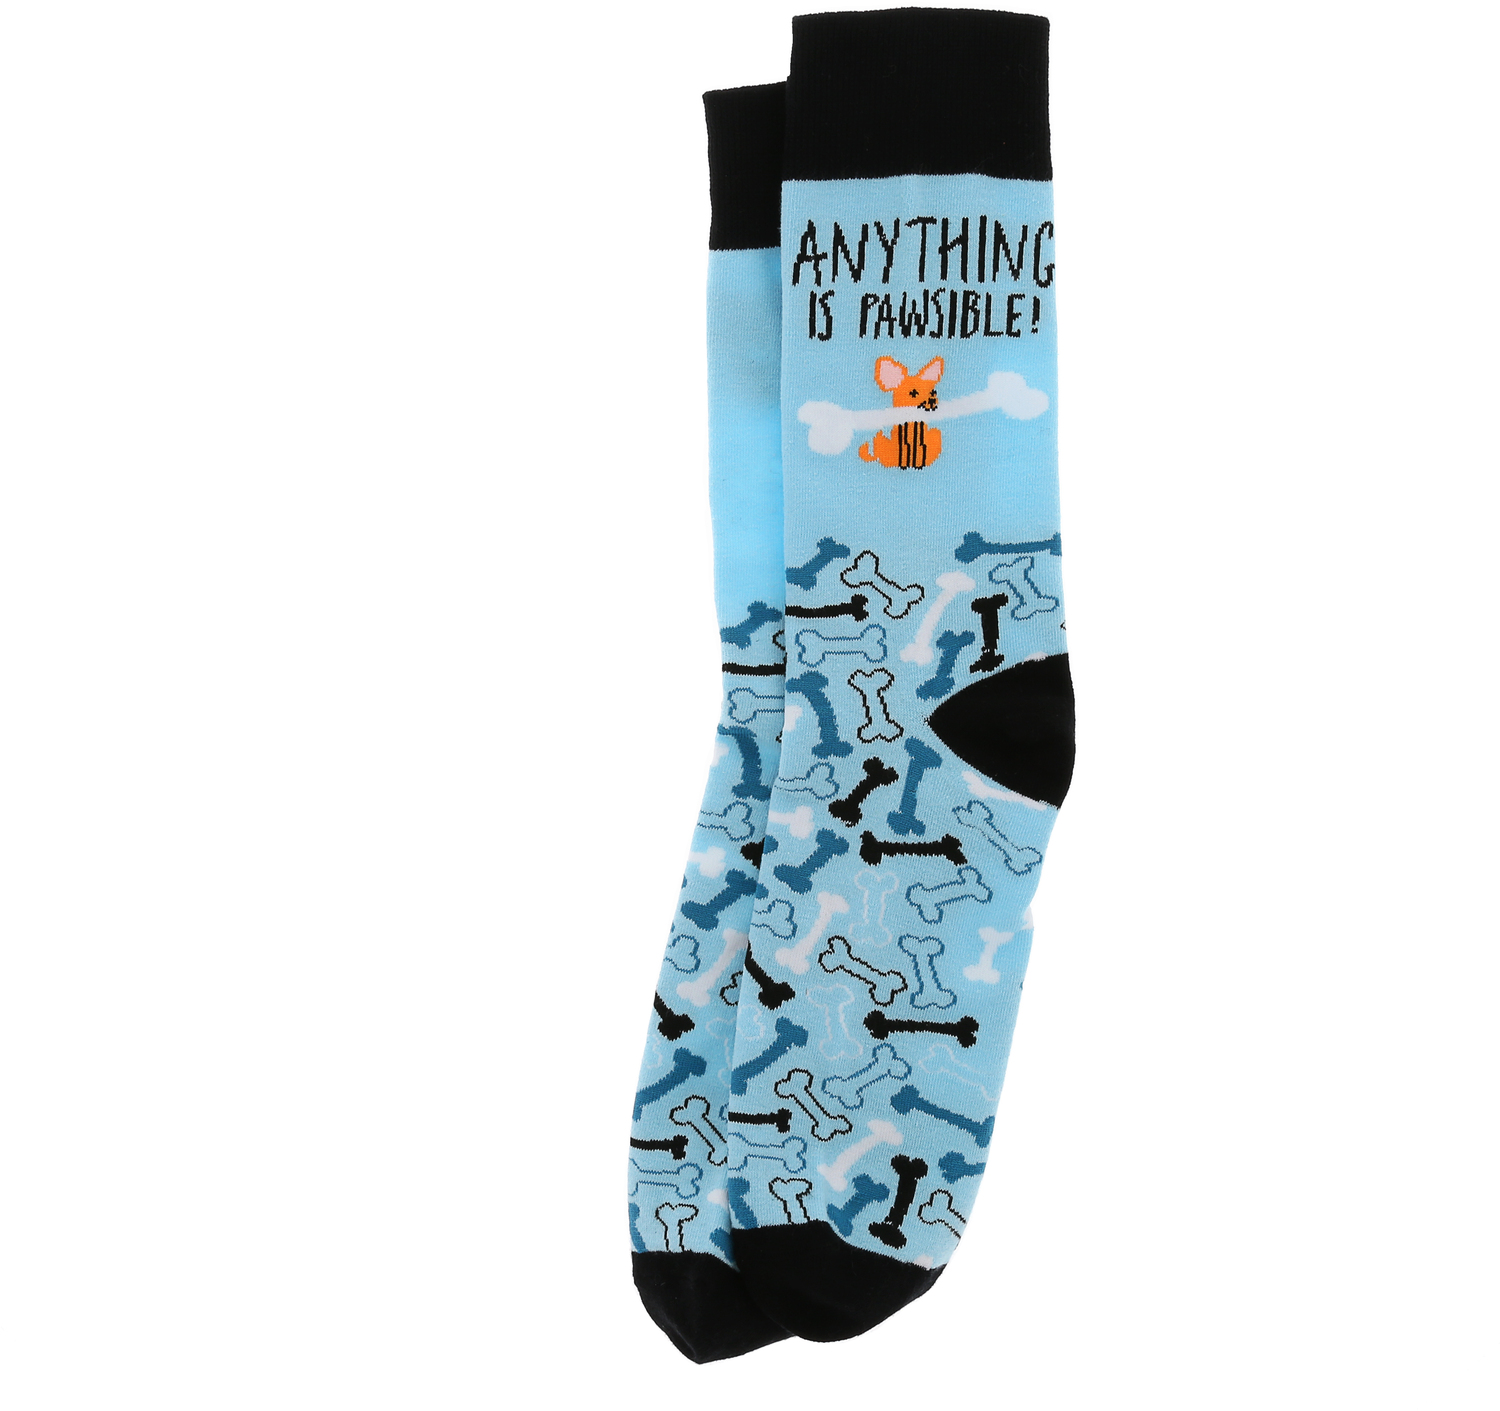 Pawsible by Pawsome Pals - Pawsible - Unisex Crew Socks
Size: M/L